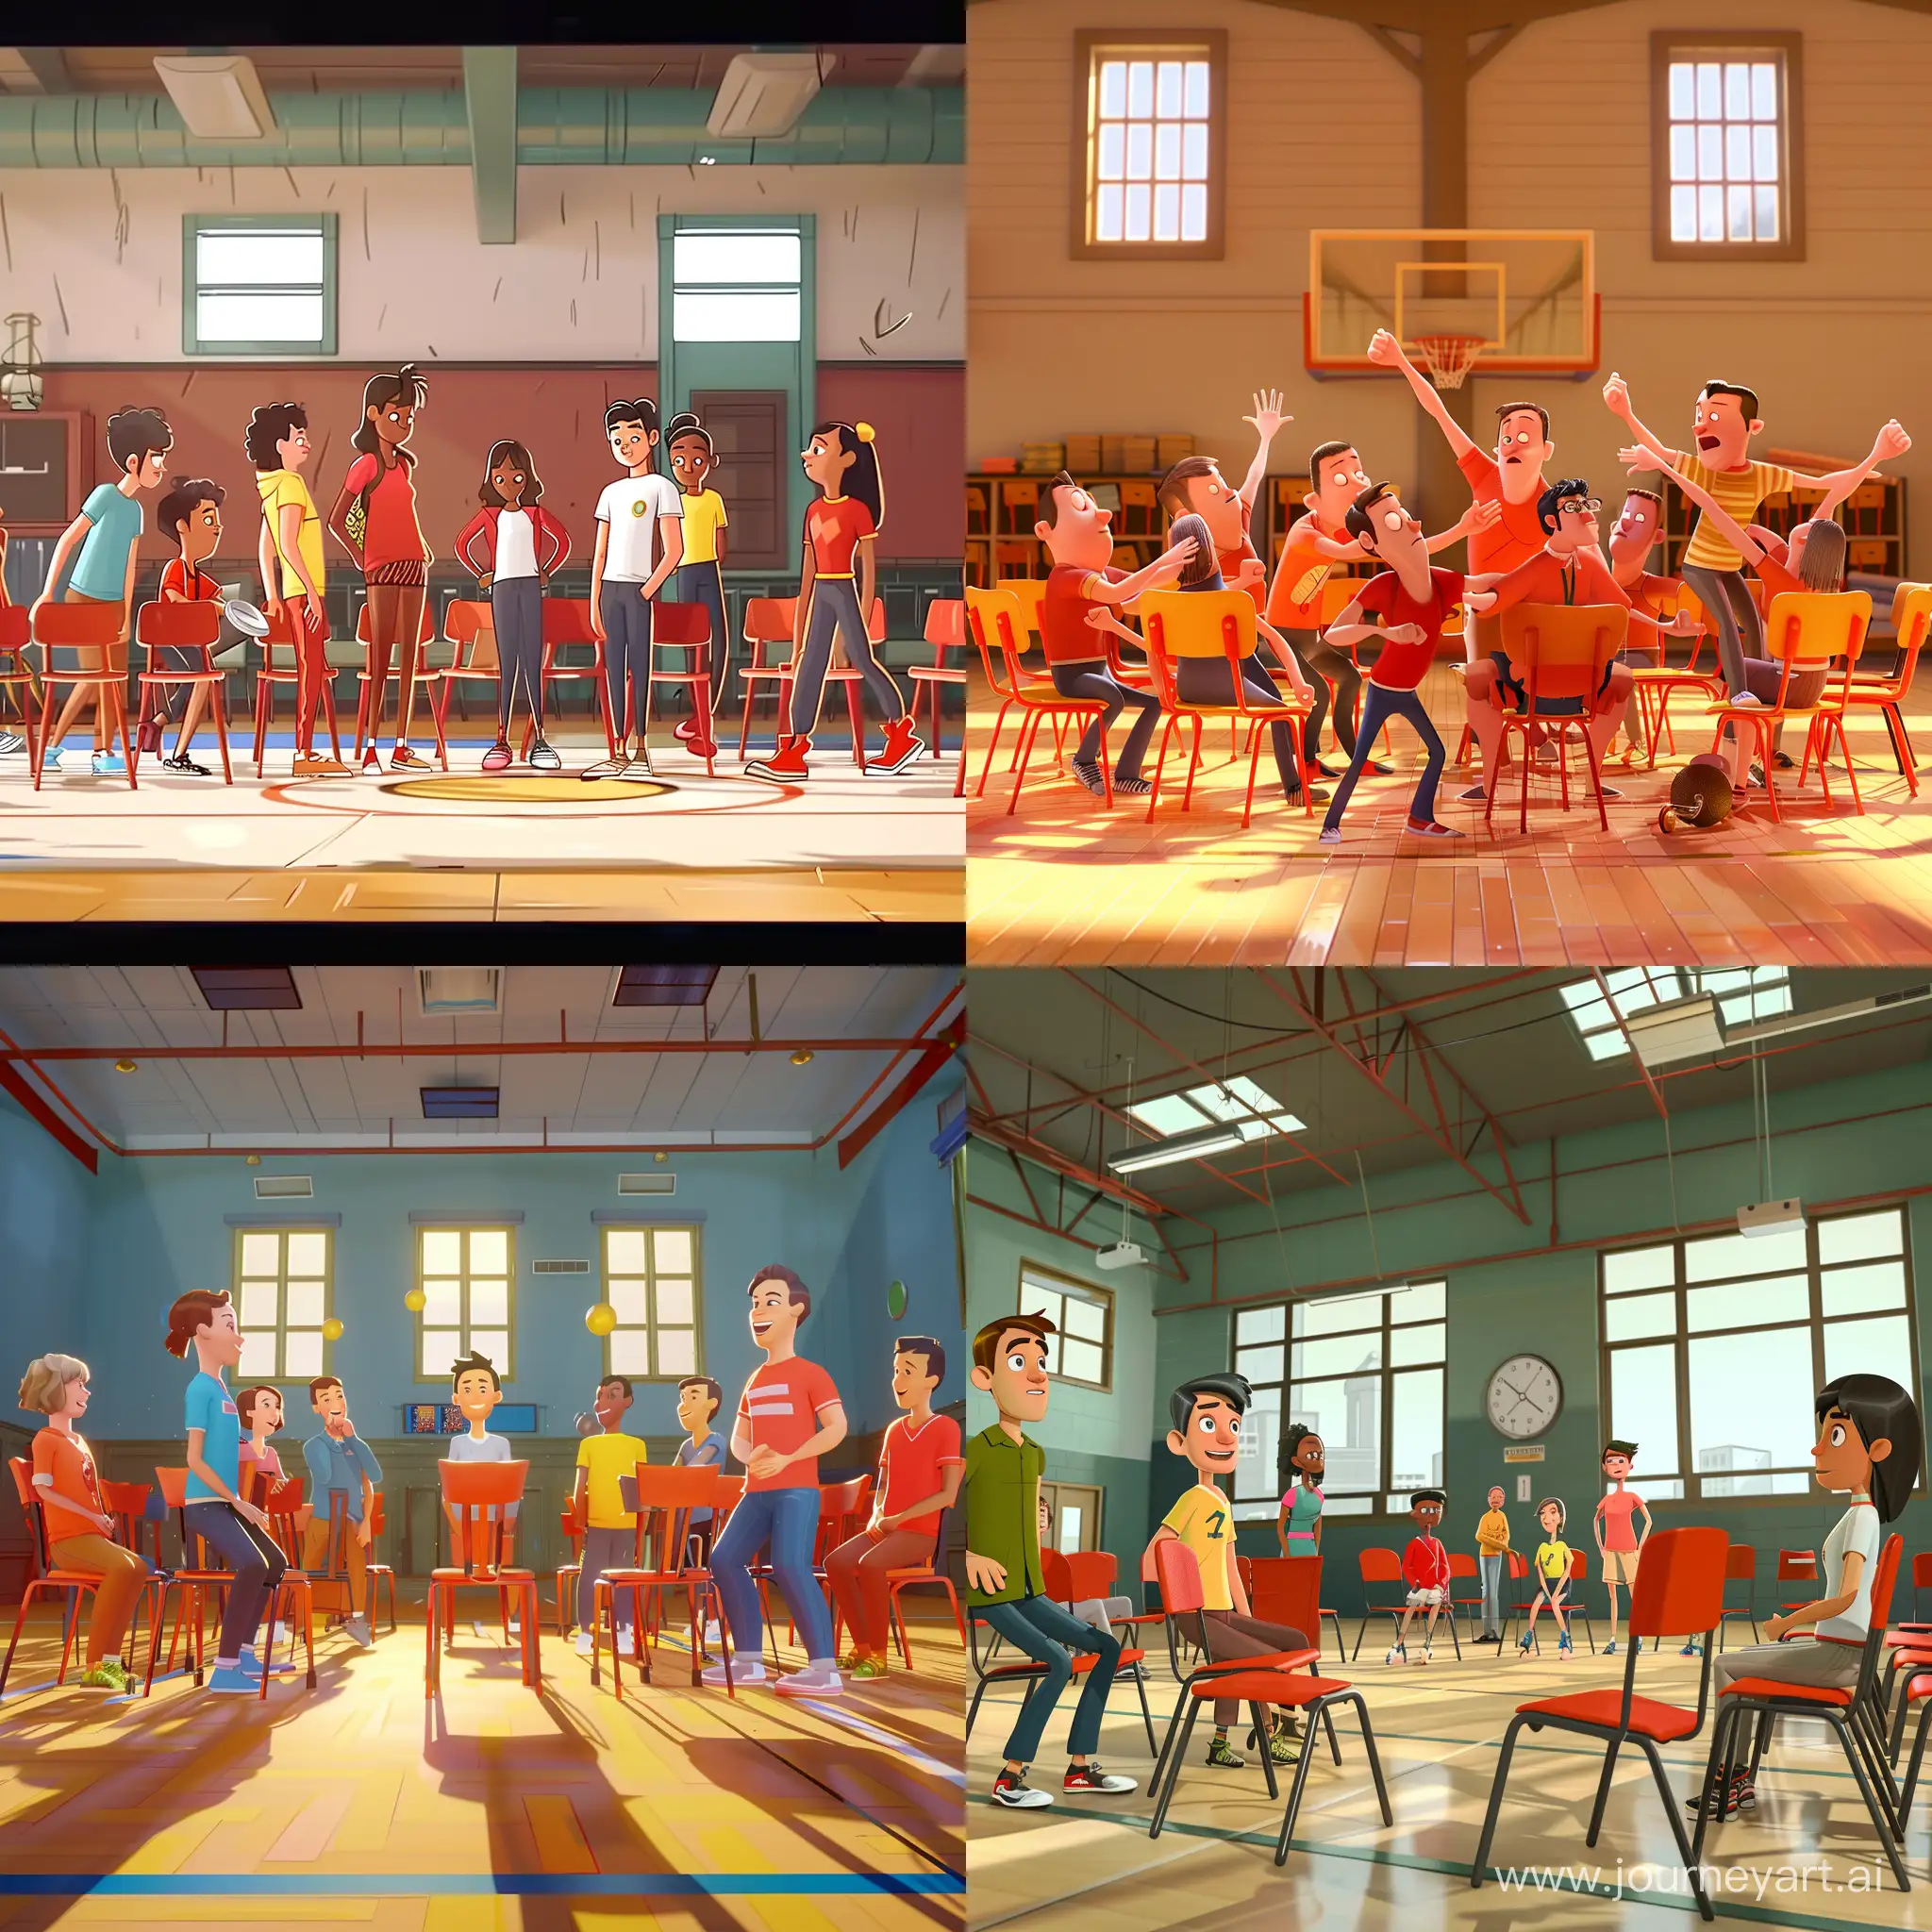 Animated-Cartoon-Team-Playing-Musical-Chairs-in-a-Gymnasium